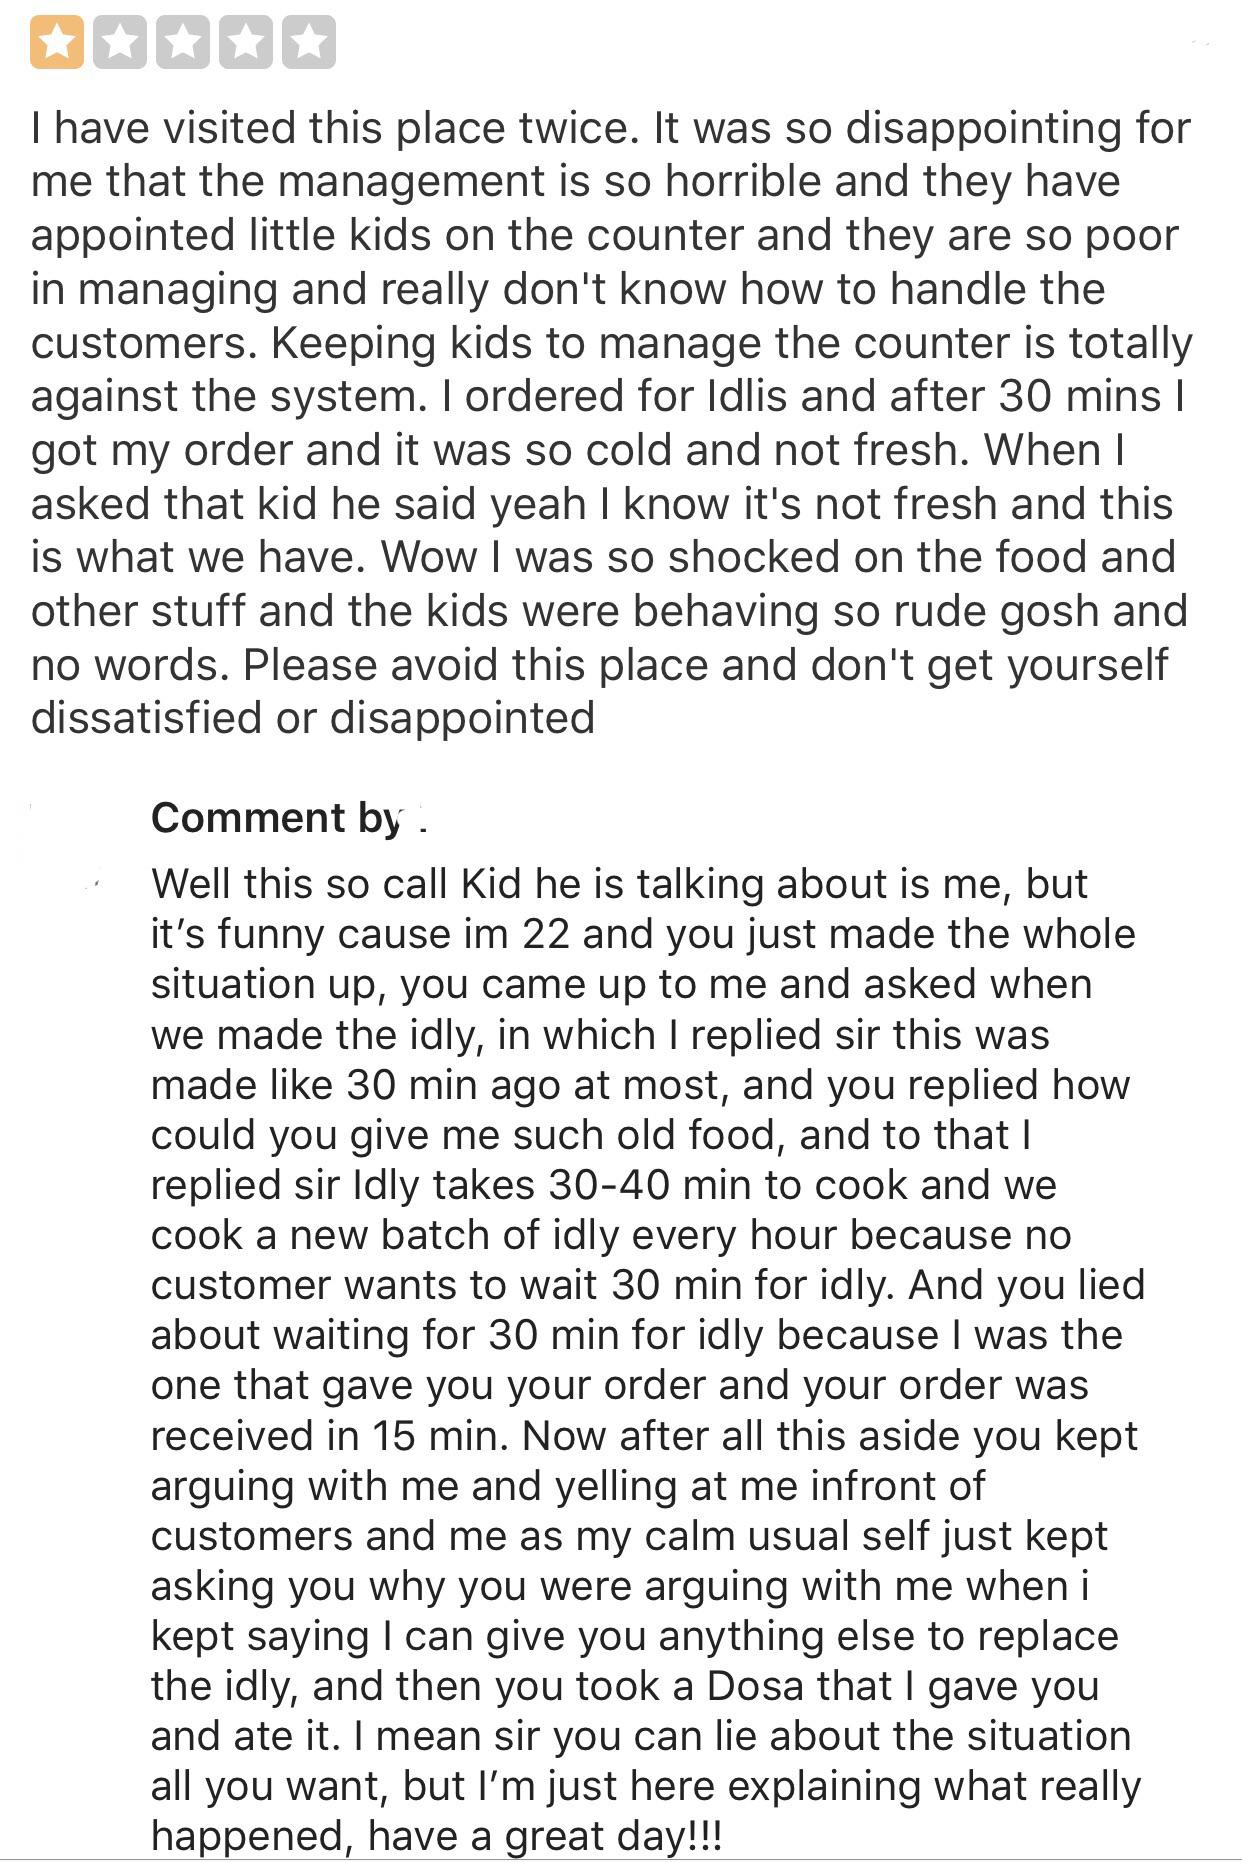 social media liars - I have visited this place twice. It was so disappointing for me that the management is so horrible and they have appointed little kids on the counter and they are so poor in managing and really don't know how to handle the customers.